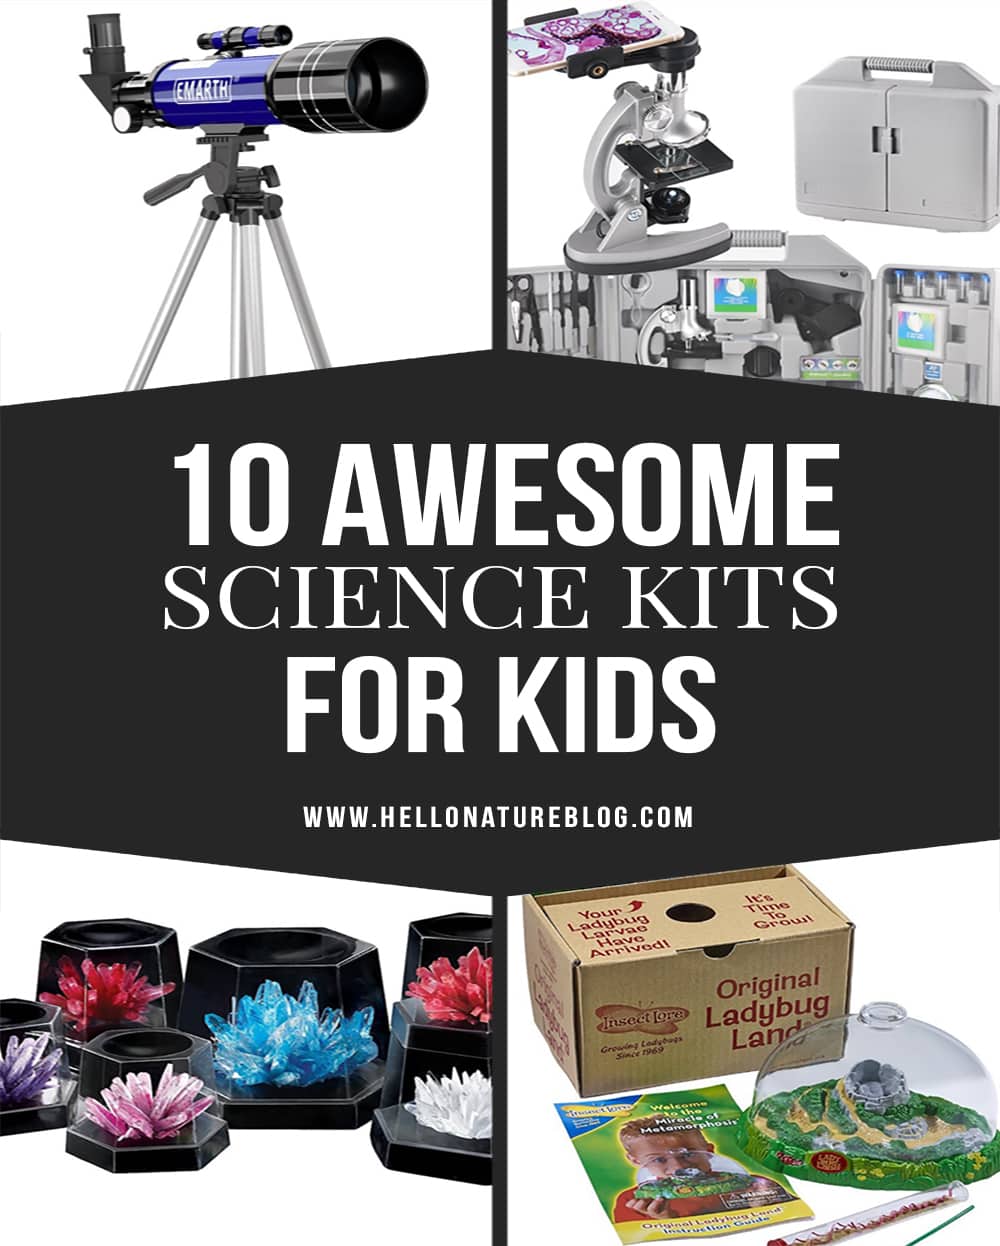 Collage of Science Kits for Kids